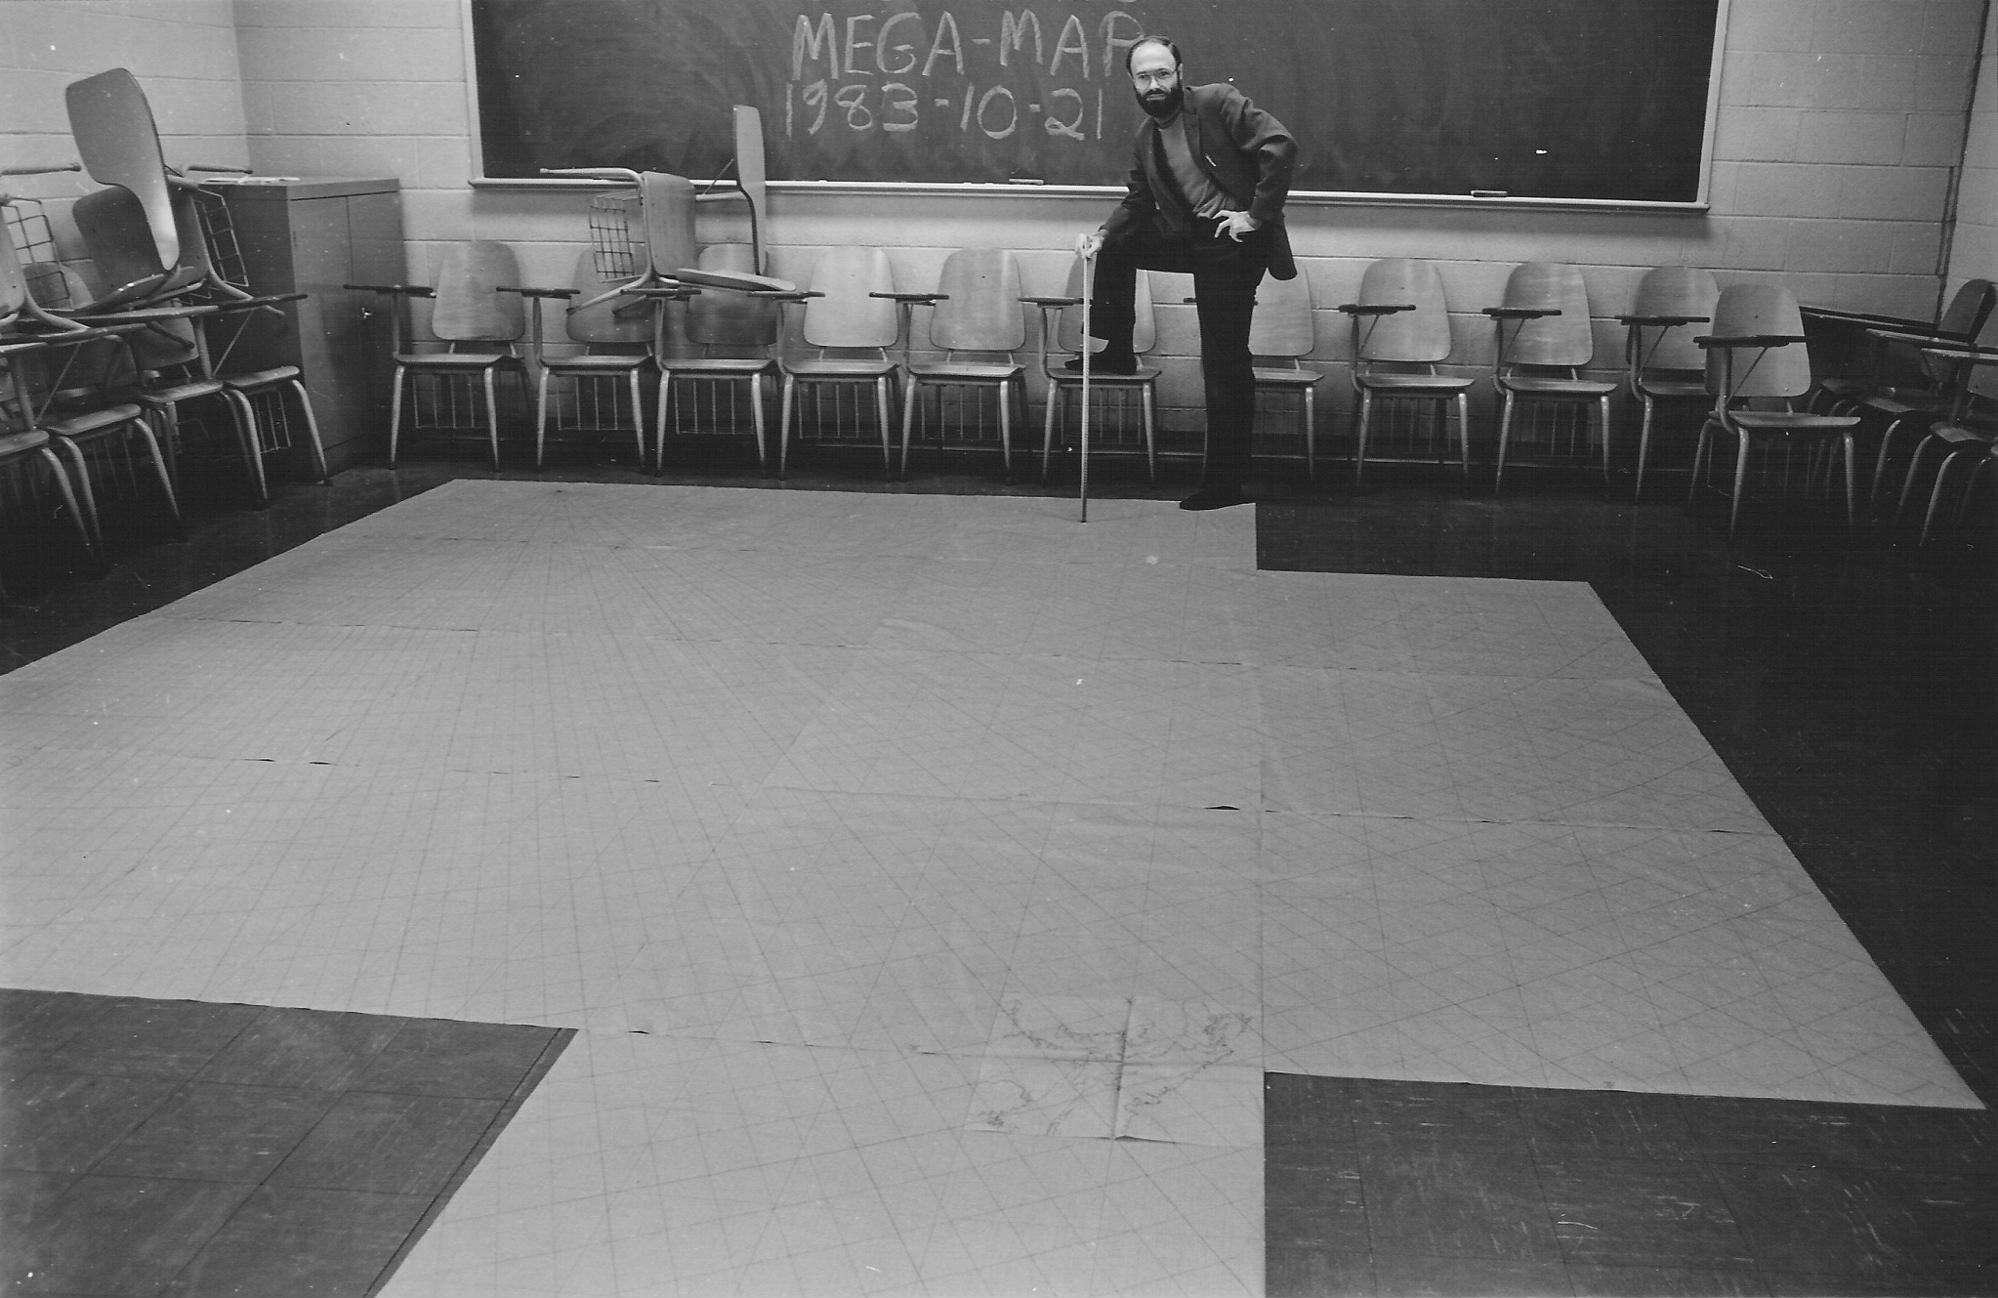 13 meter-square panels of Cahill-Keyes Mega-map graticule template on classroom floor